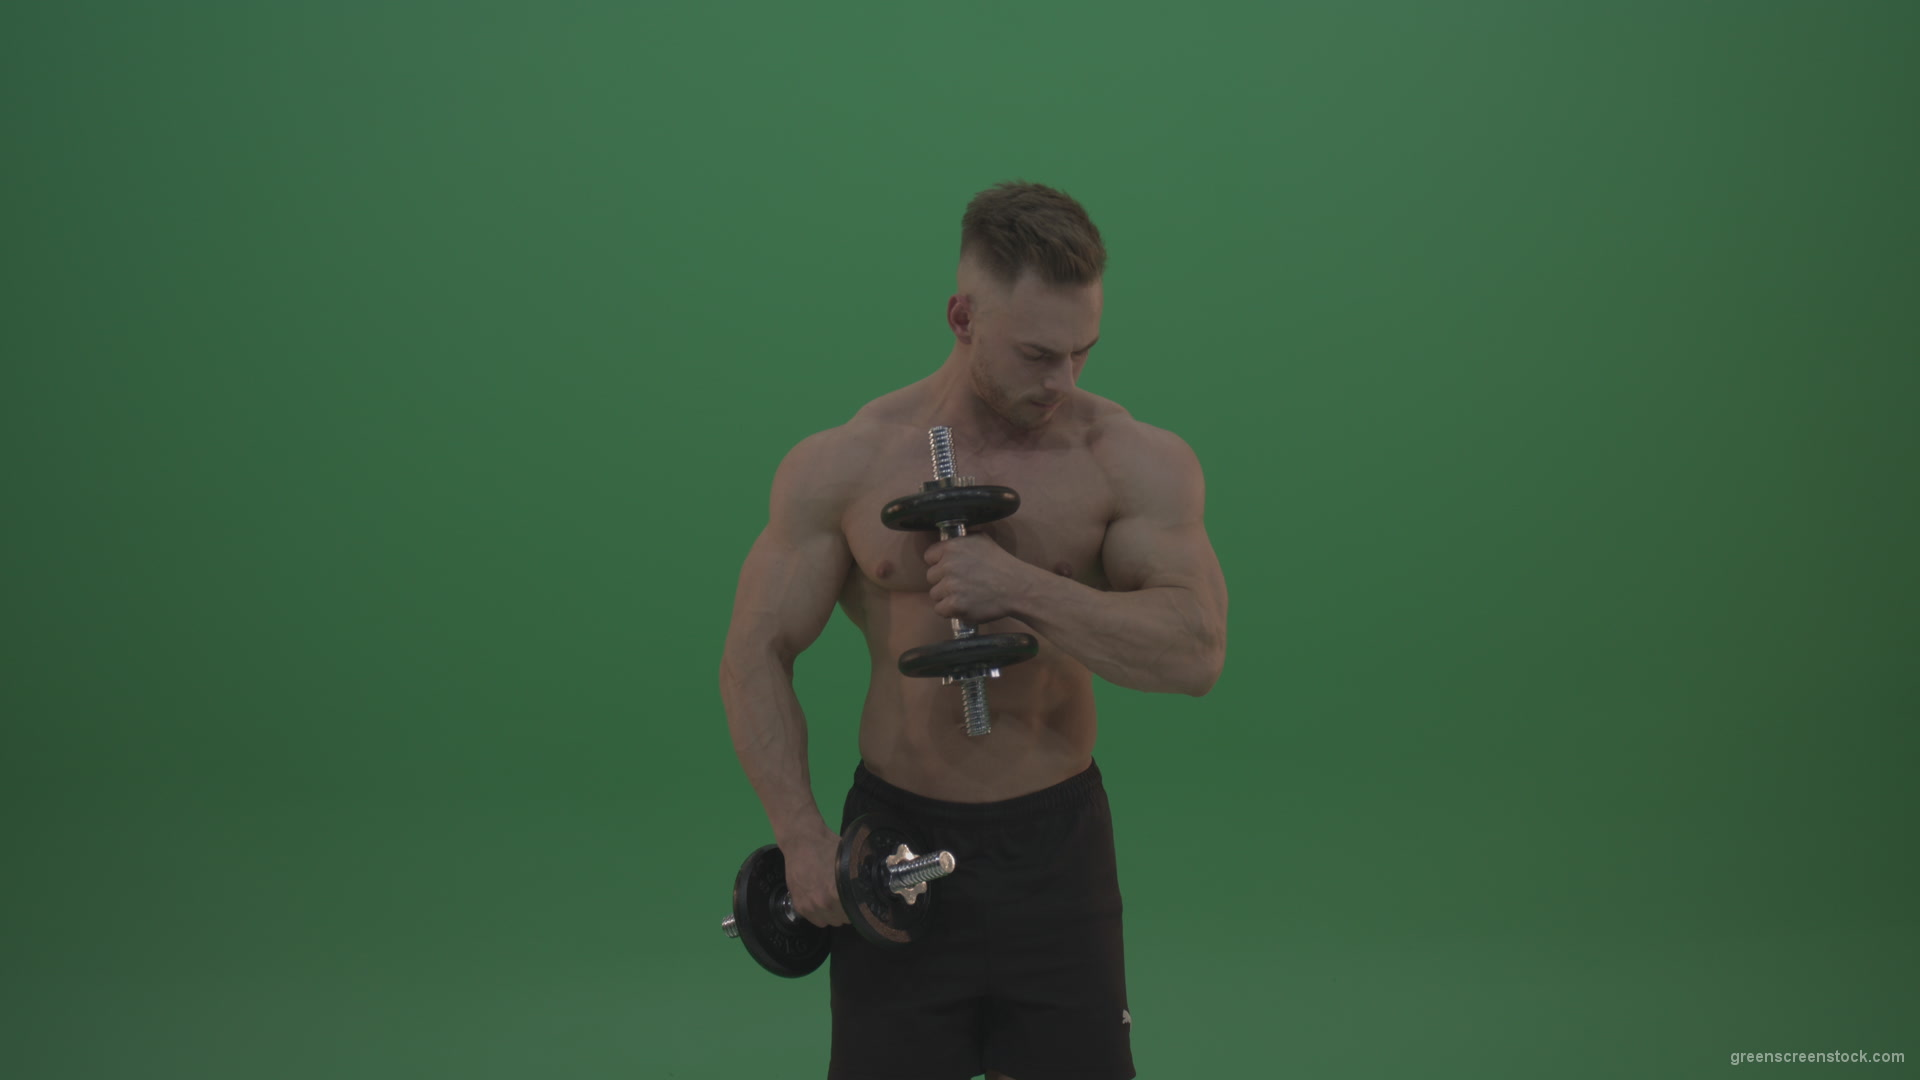 Young_Bodybuilder_Working_Out_With_Two_Handed_Dumbbell_Biceps_Exercises_On_Green_Screen_Wall_Background_004 Green Screen Stock